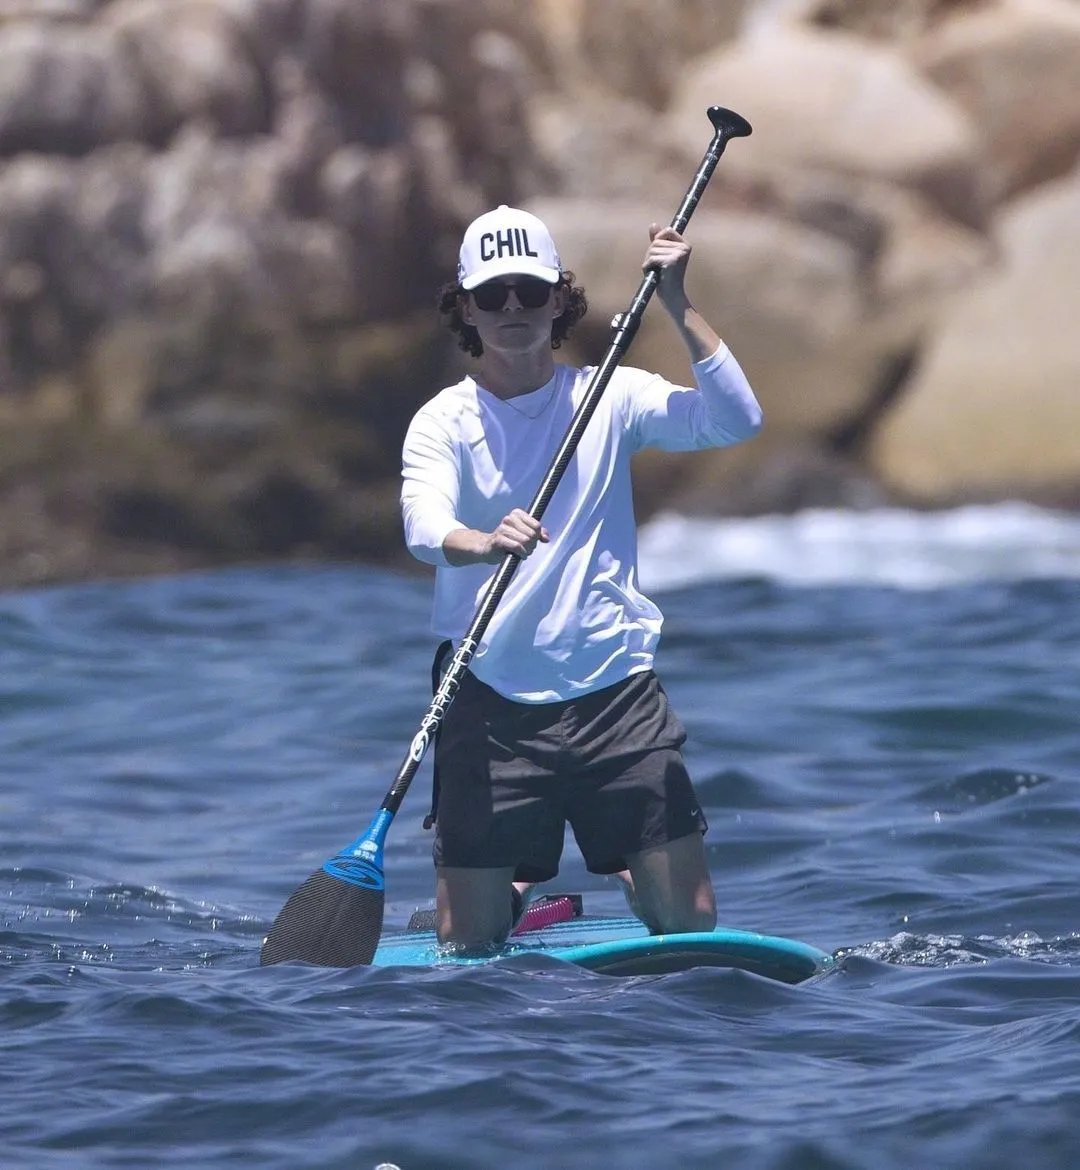 Tom Holland paddle board at the beach | FMV6